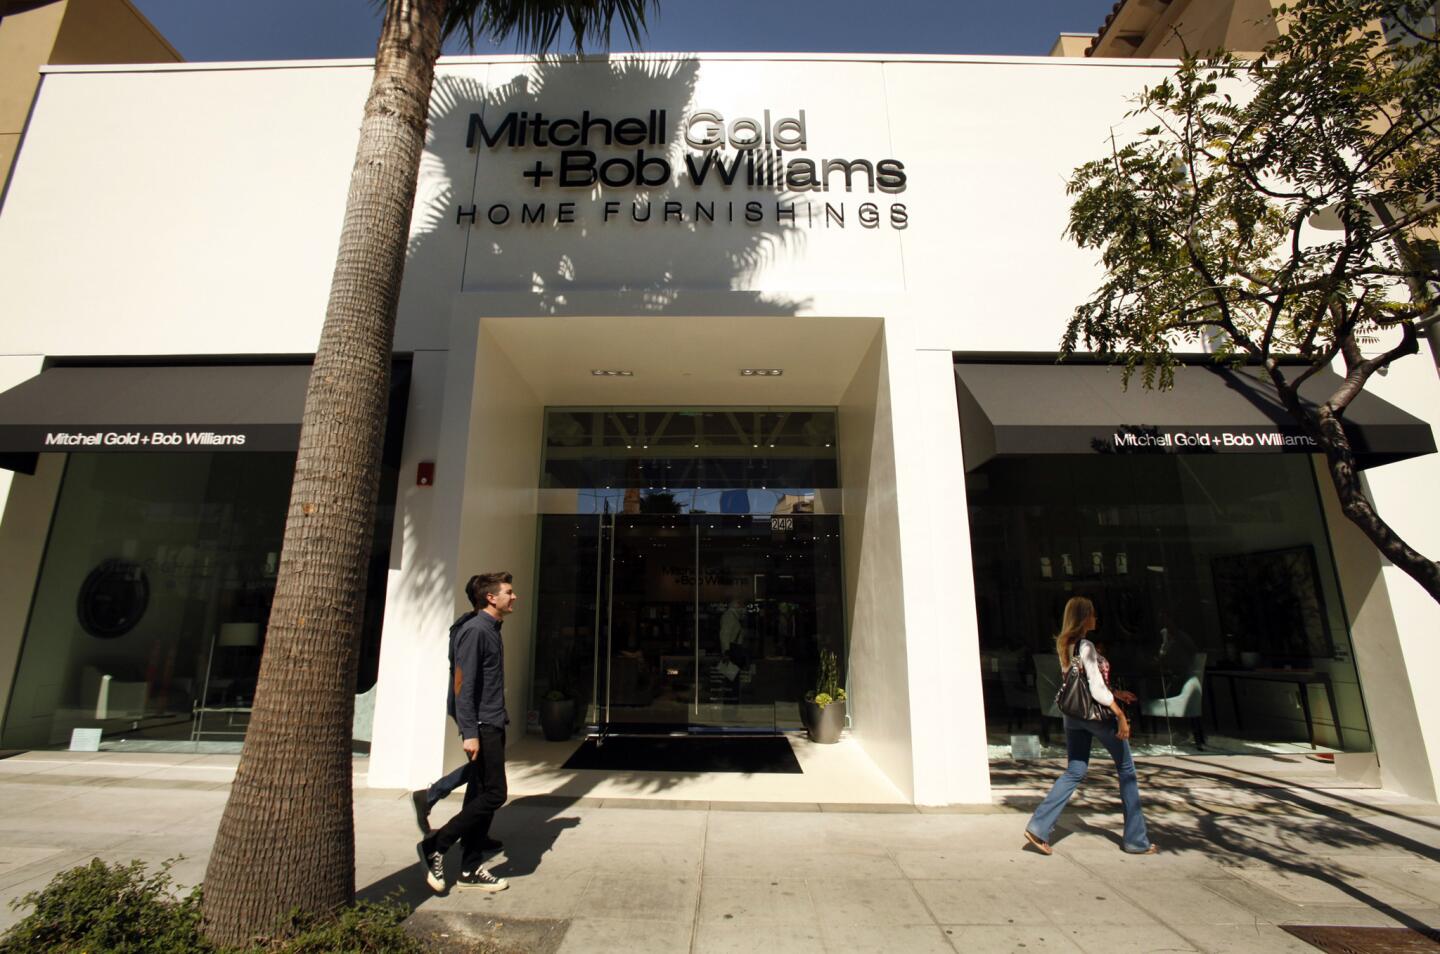 The new Mitchell Gold + Bob Williams in Beverly Hills is about three times the size of the former studio on 3rd Street.